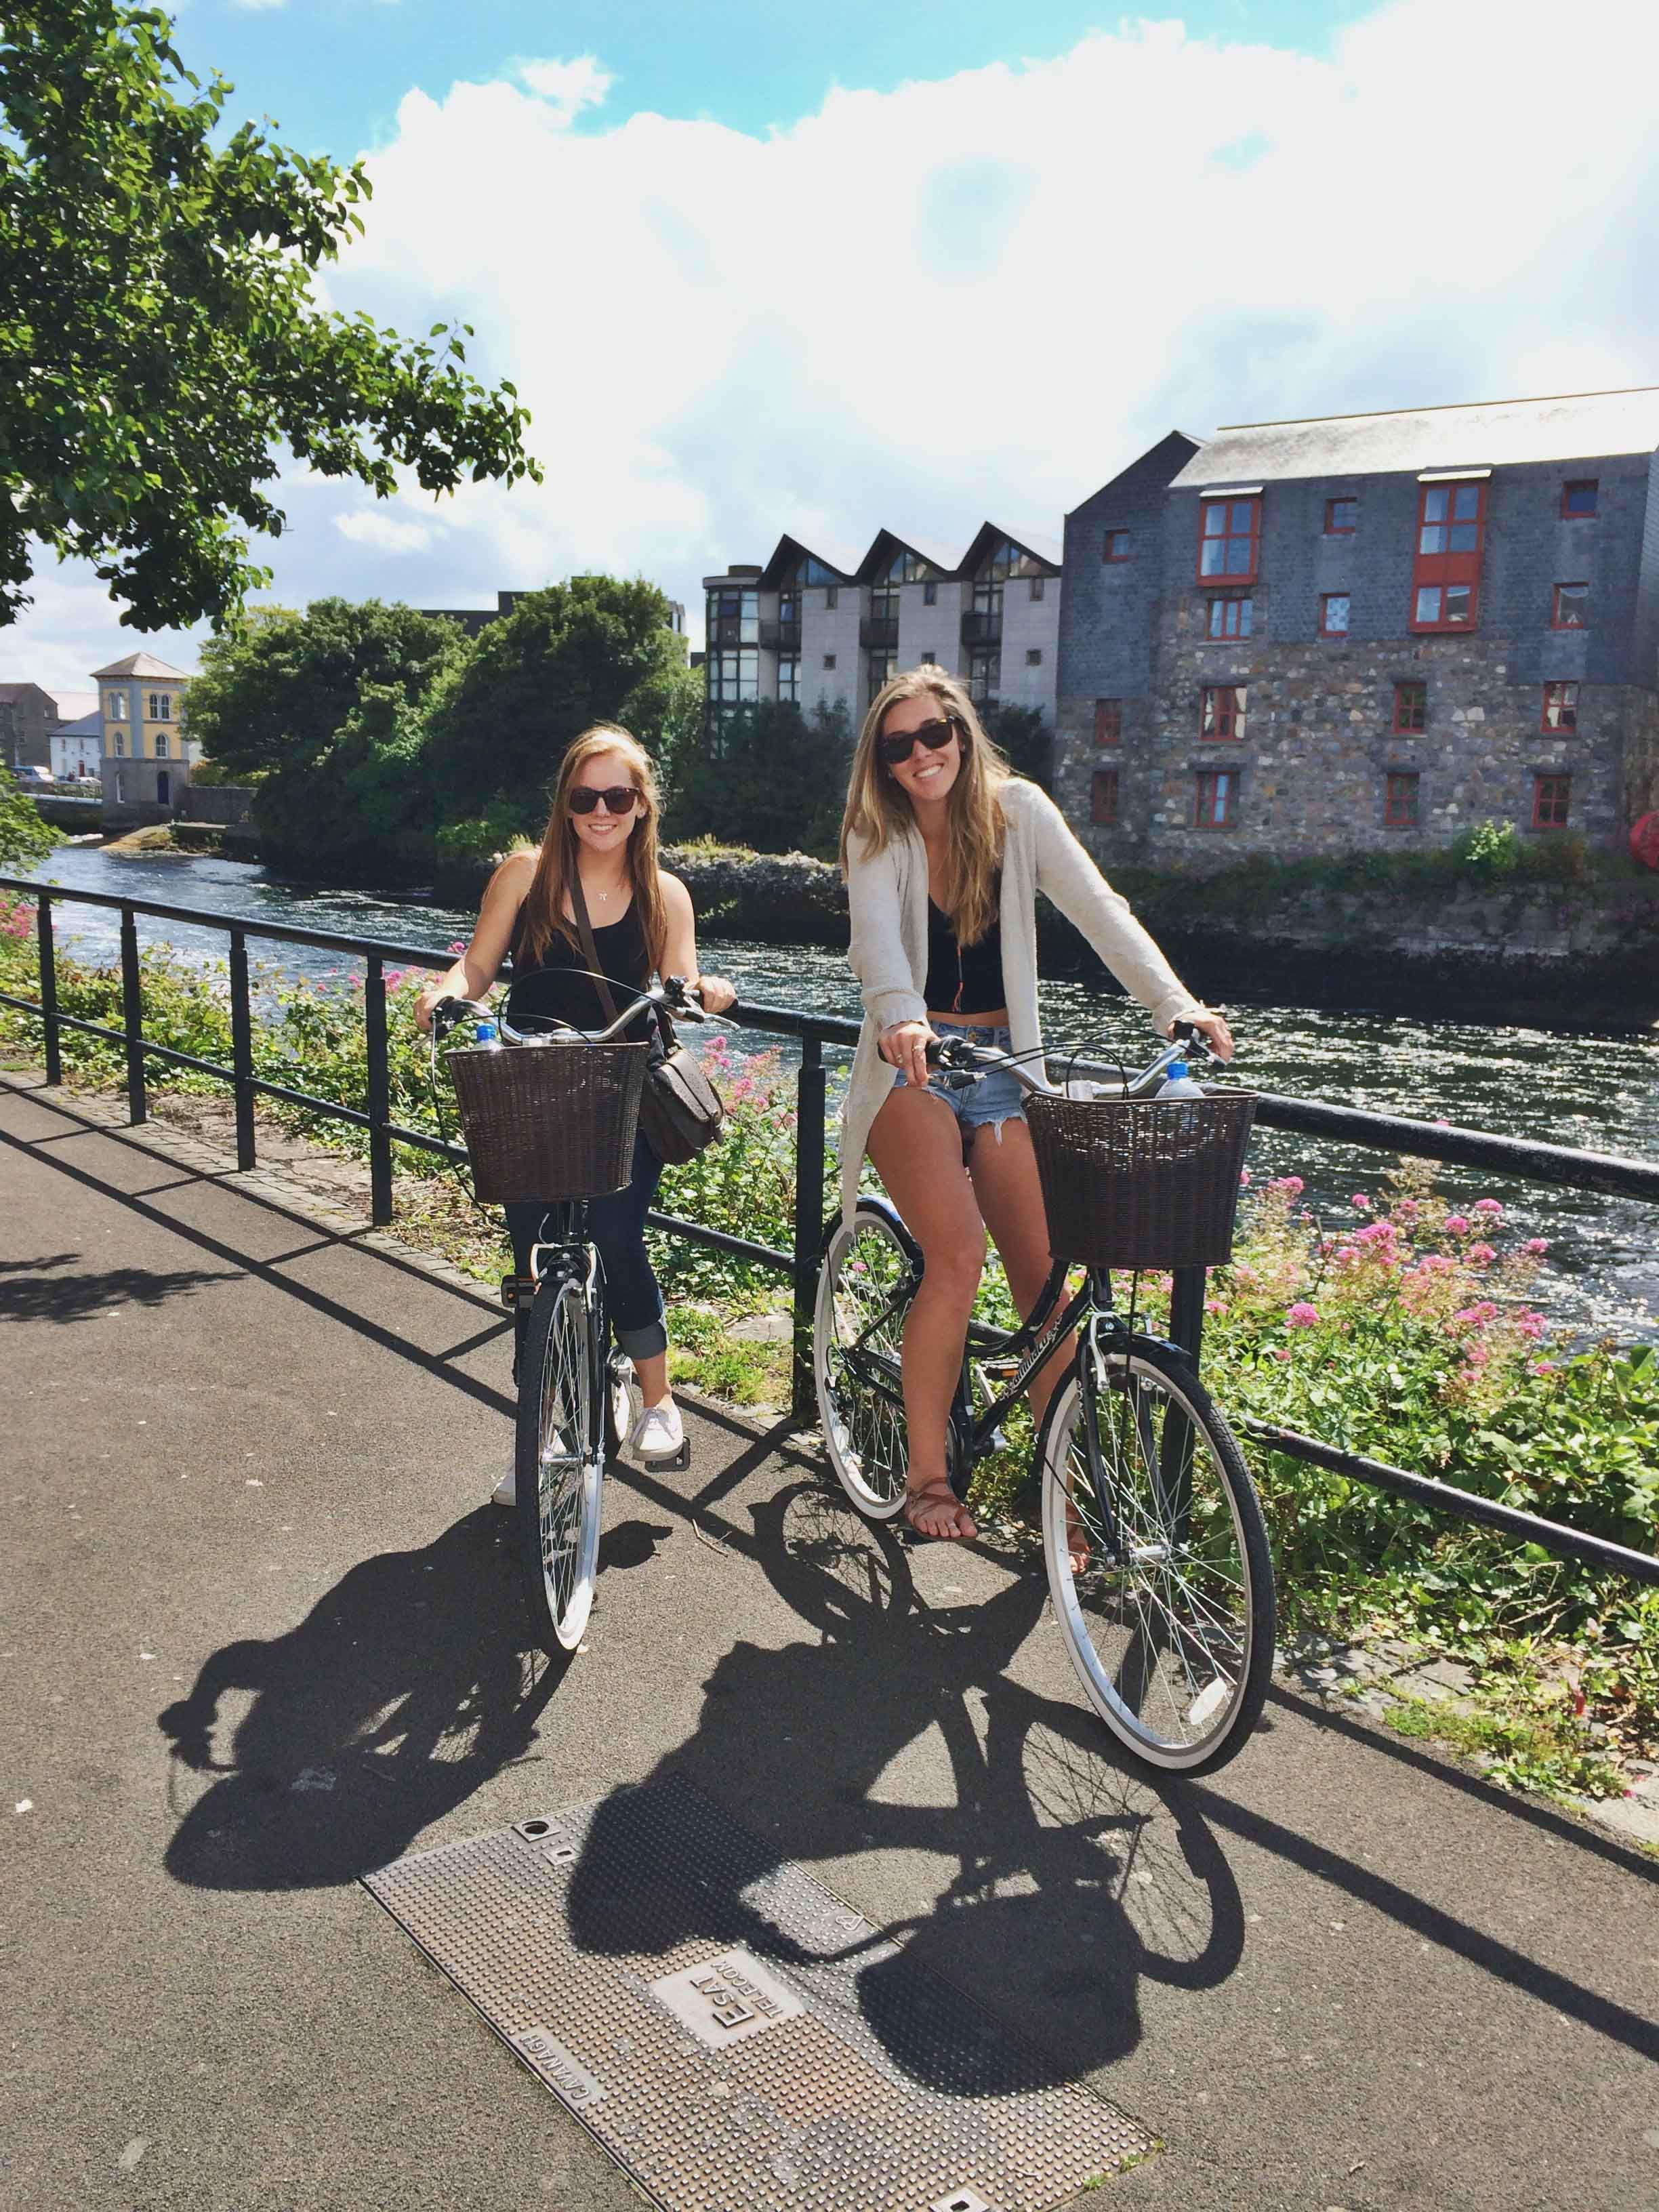 Students riding bikes in Galway, Ireland.